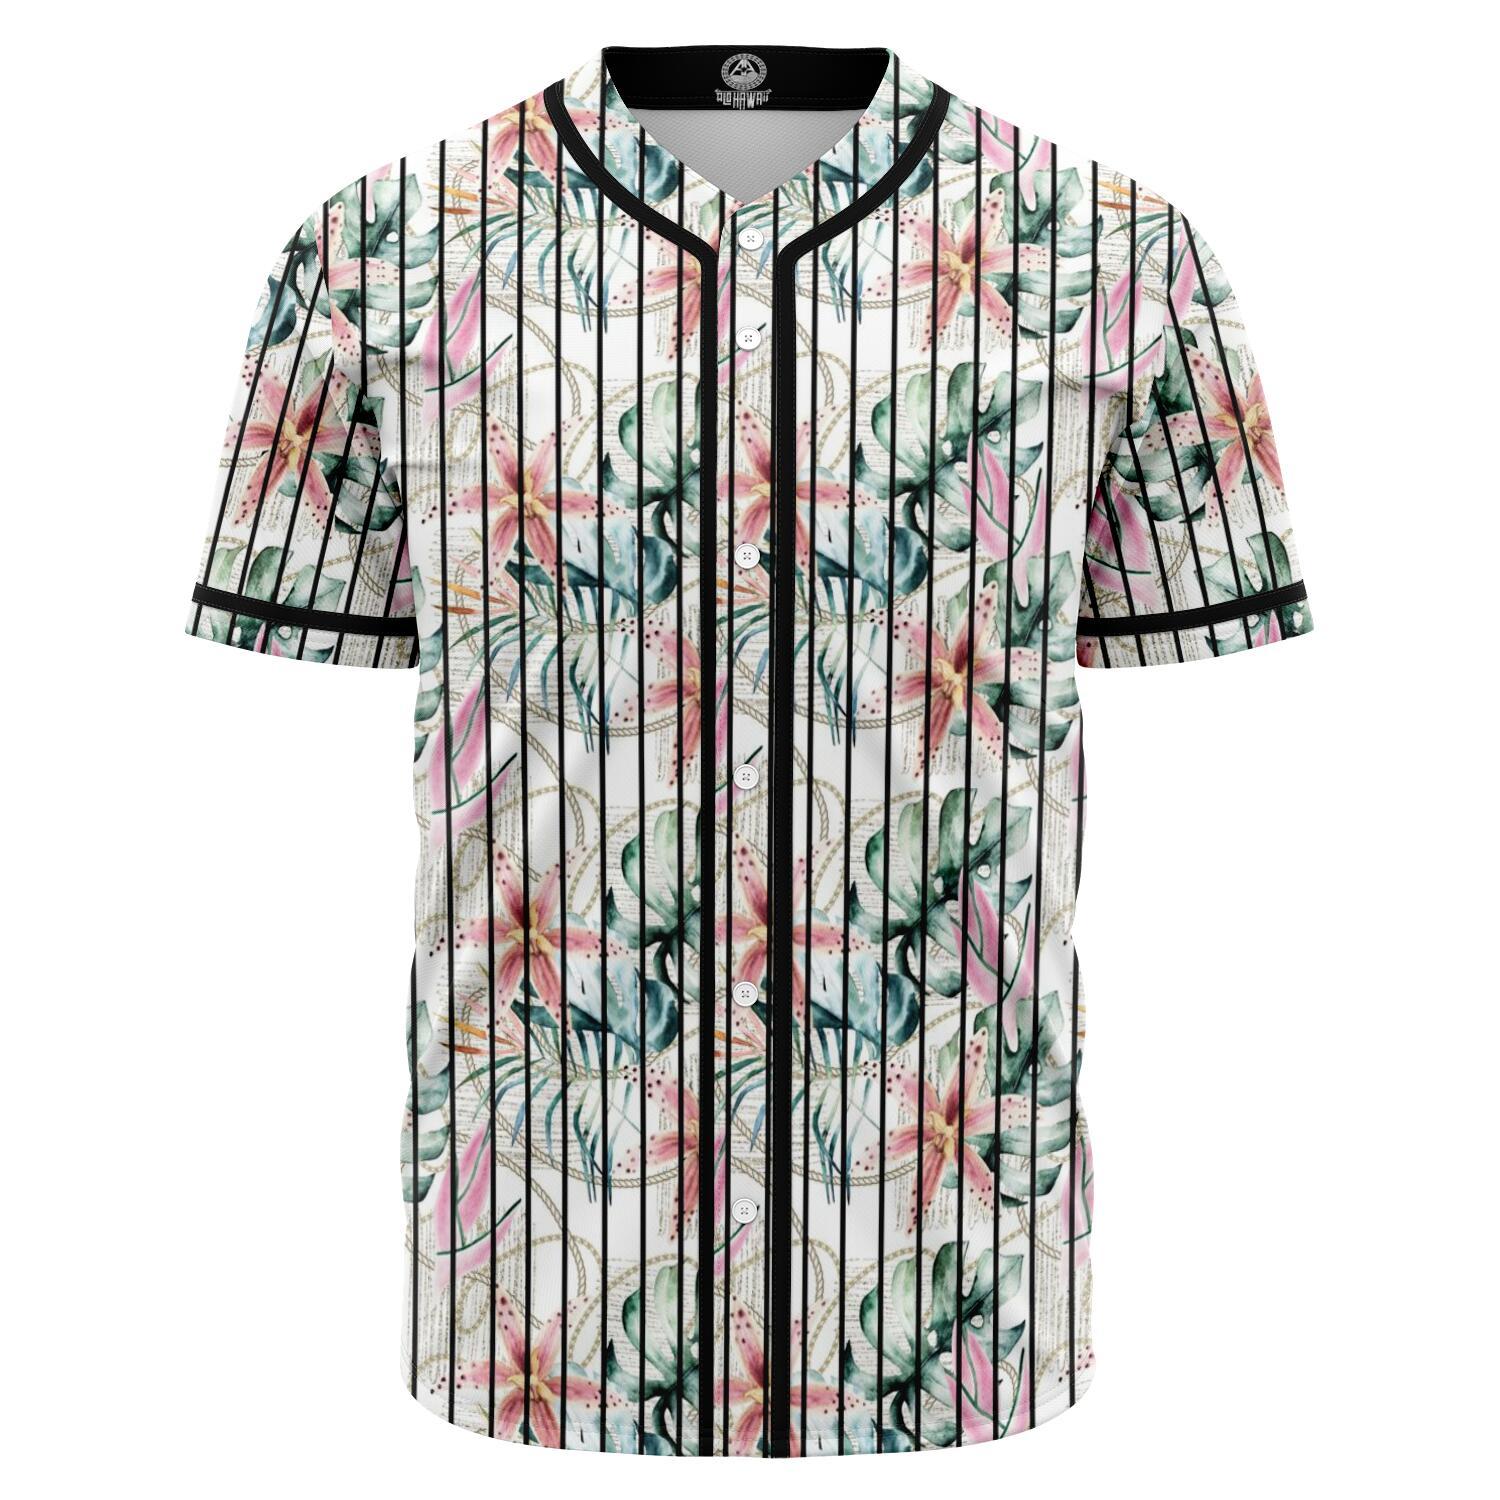 Tropical Pattern With Orchids, Leaves And Gold Chains Baseball Jersey Black - Polynesian Pride